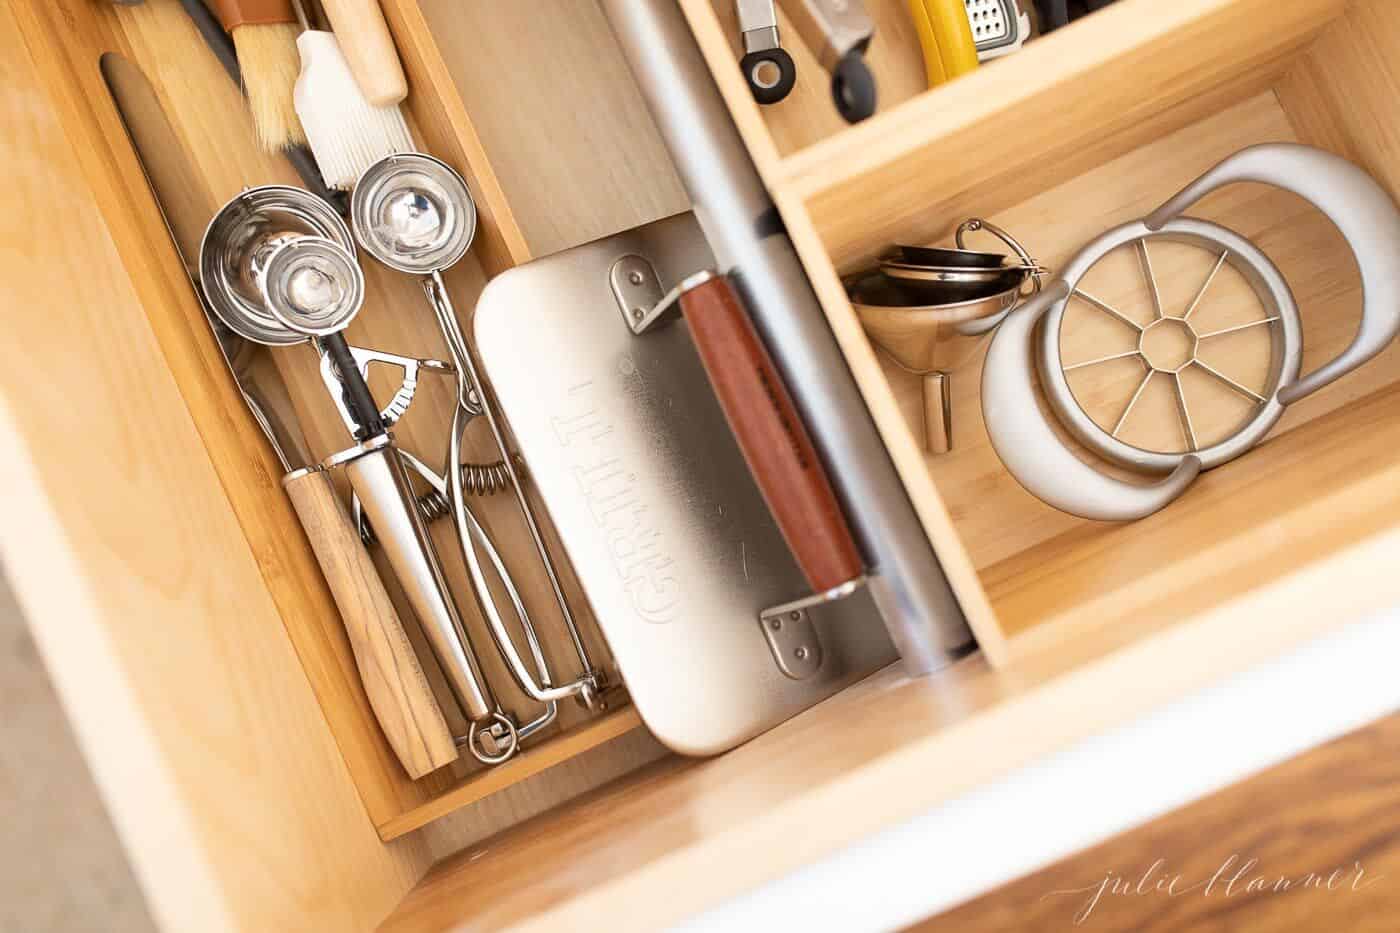 Looking into a drawer full of kitchen drawer inserts with utensils.